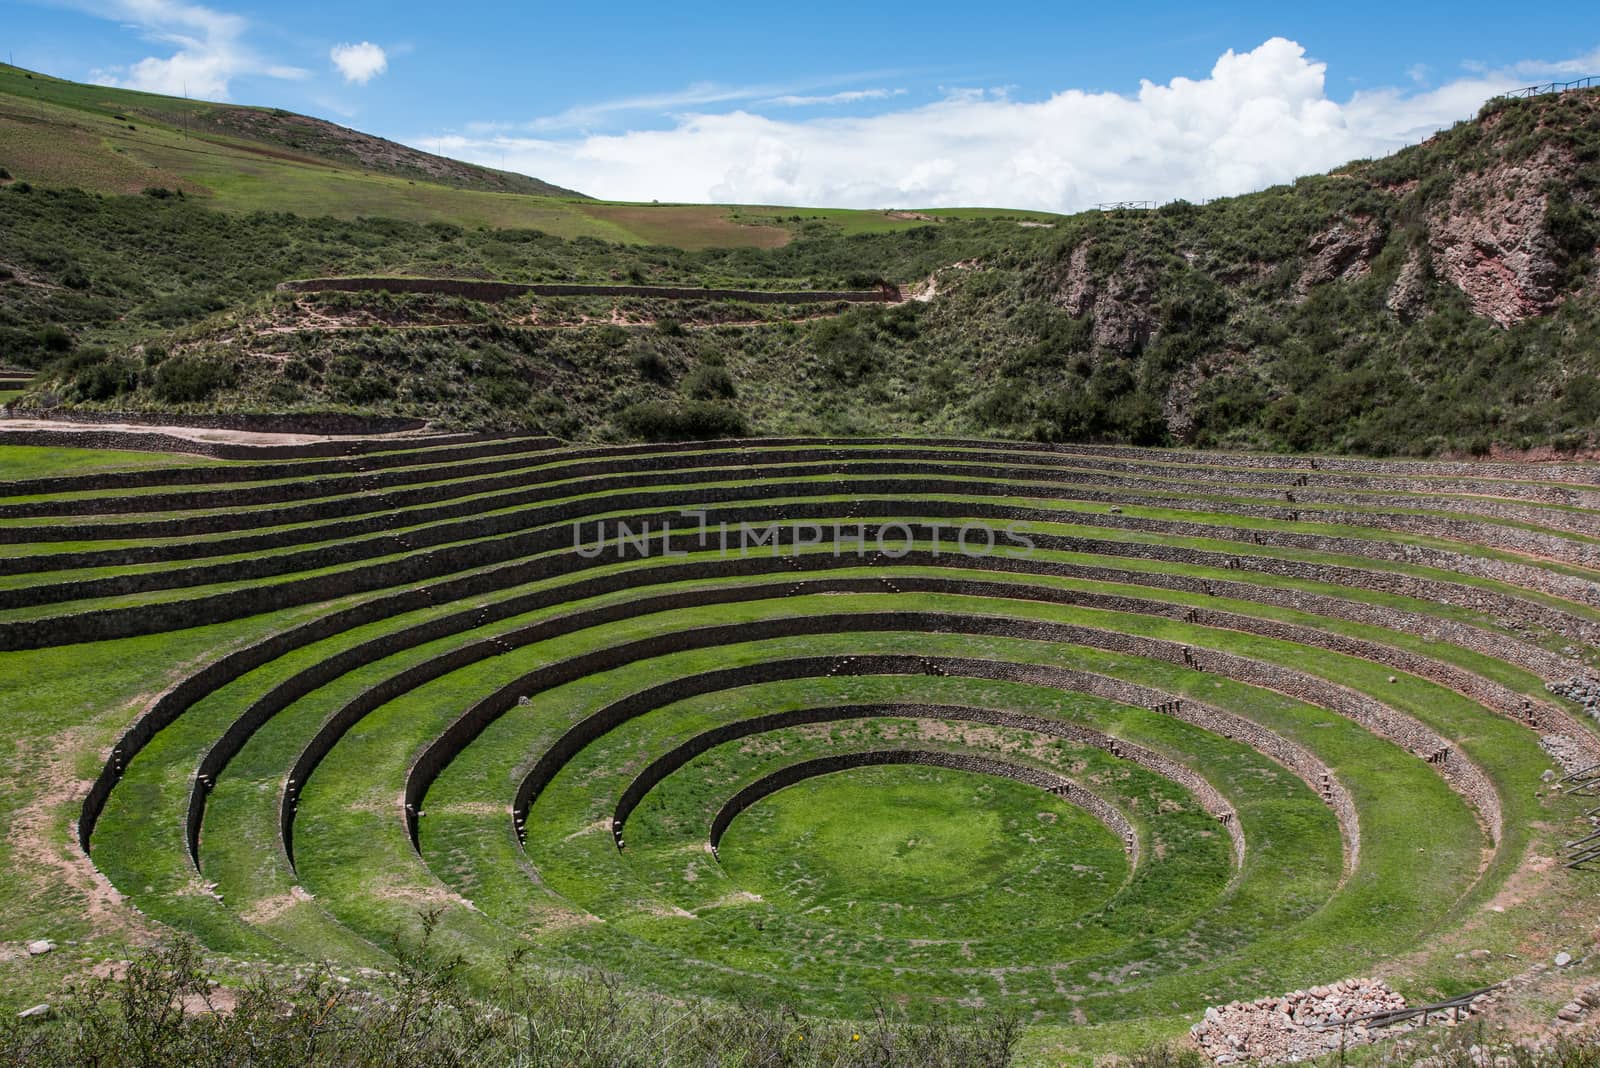 Concentric terraces Inca period Moray Urubamba valley Peru by rayints